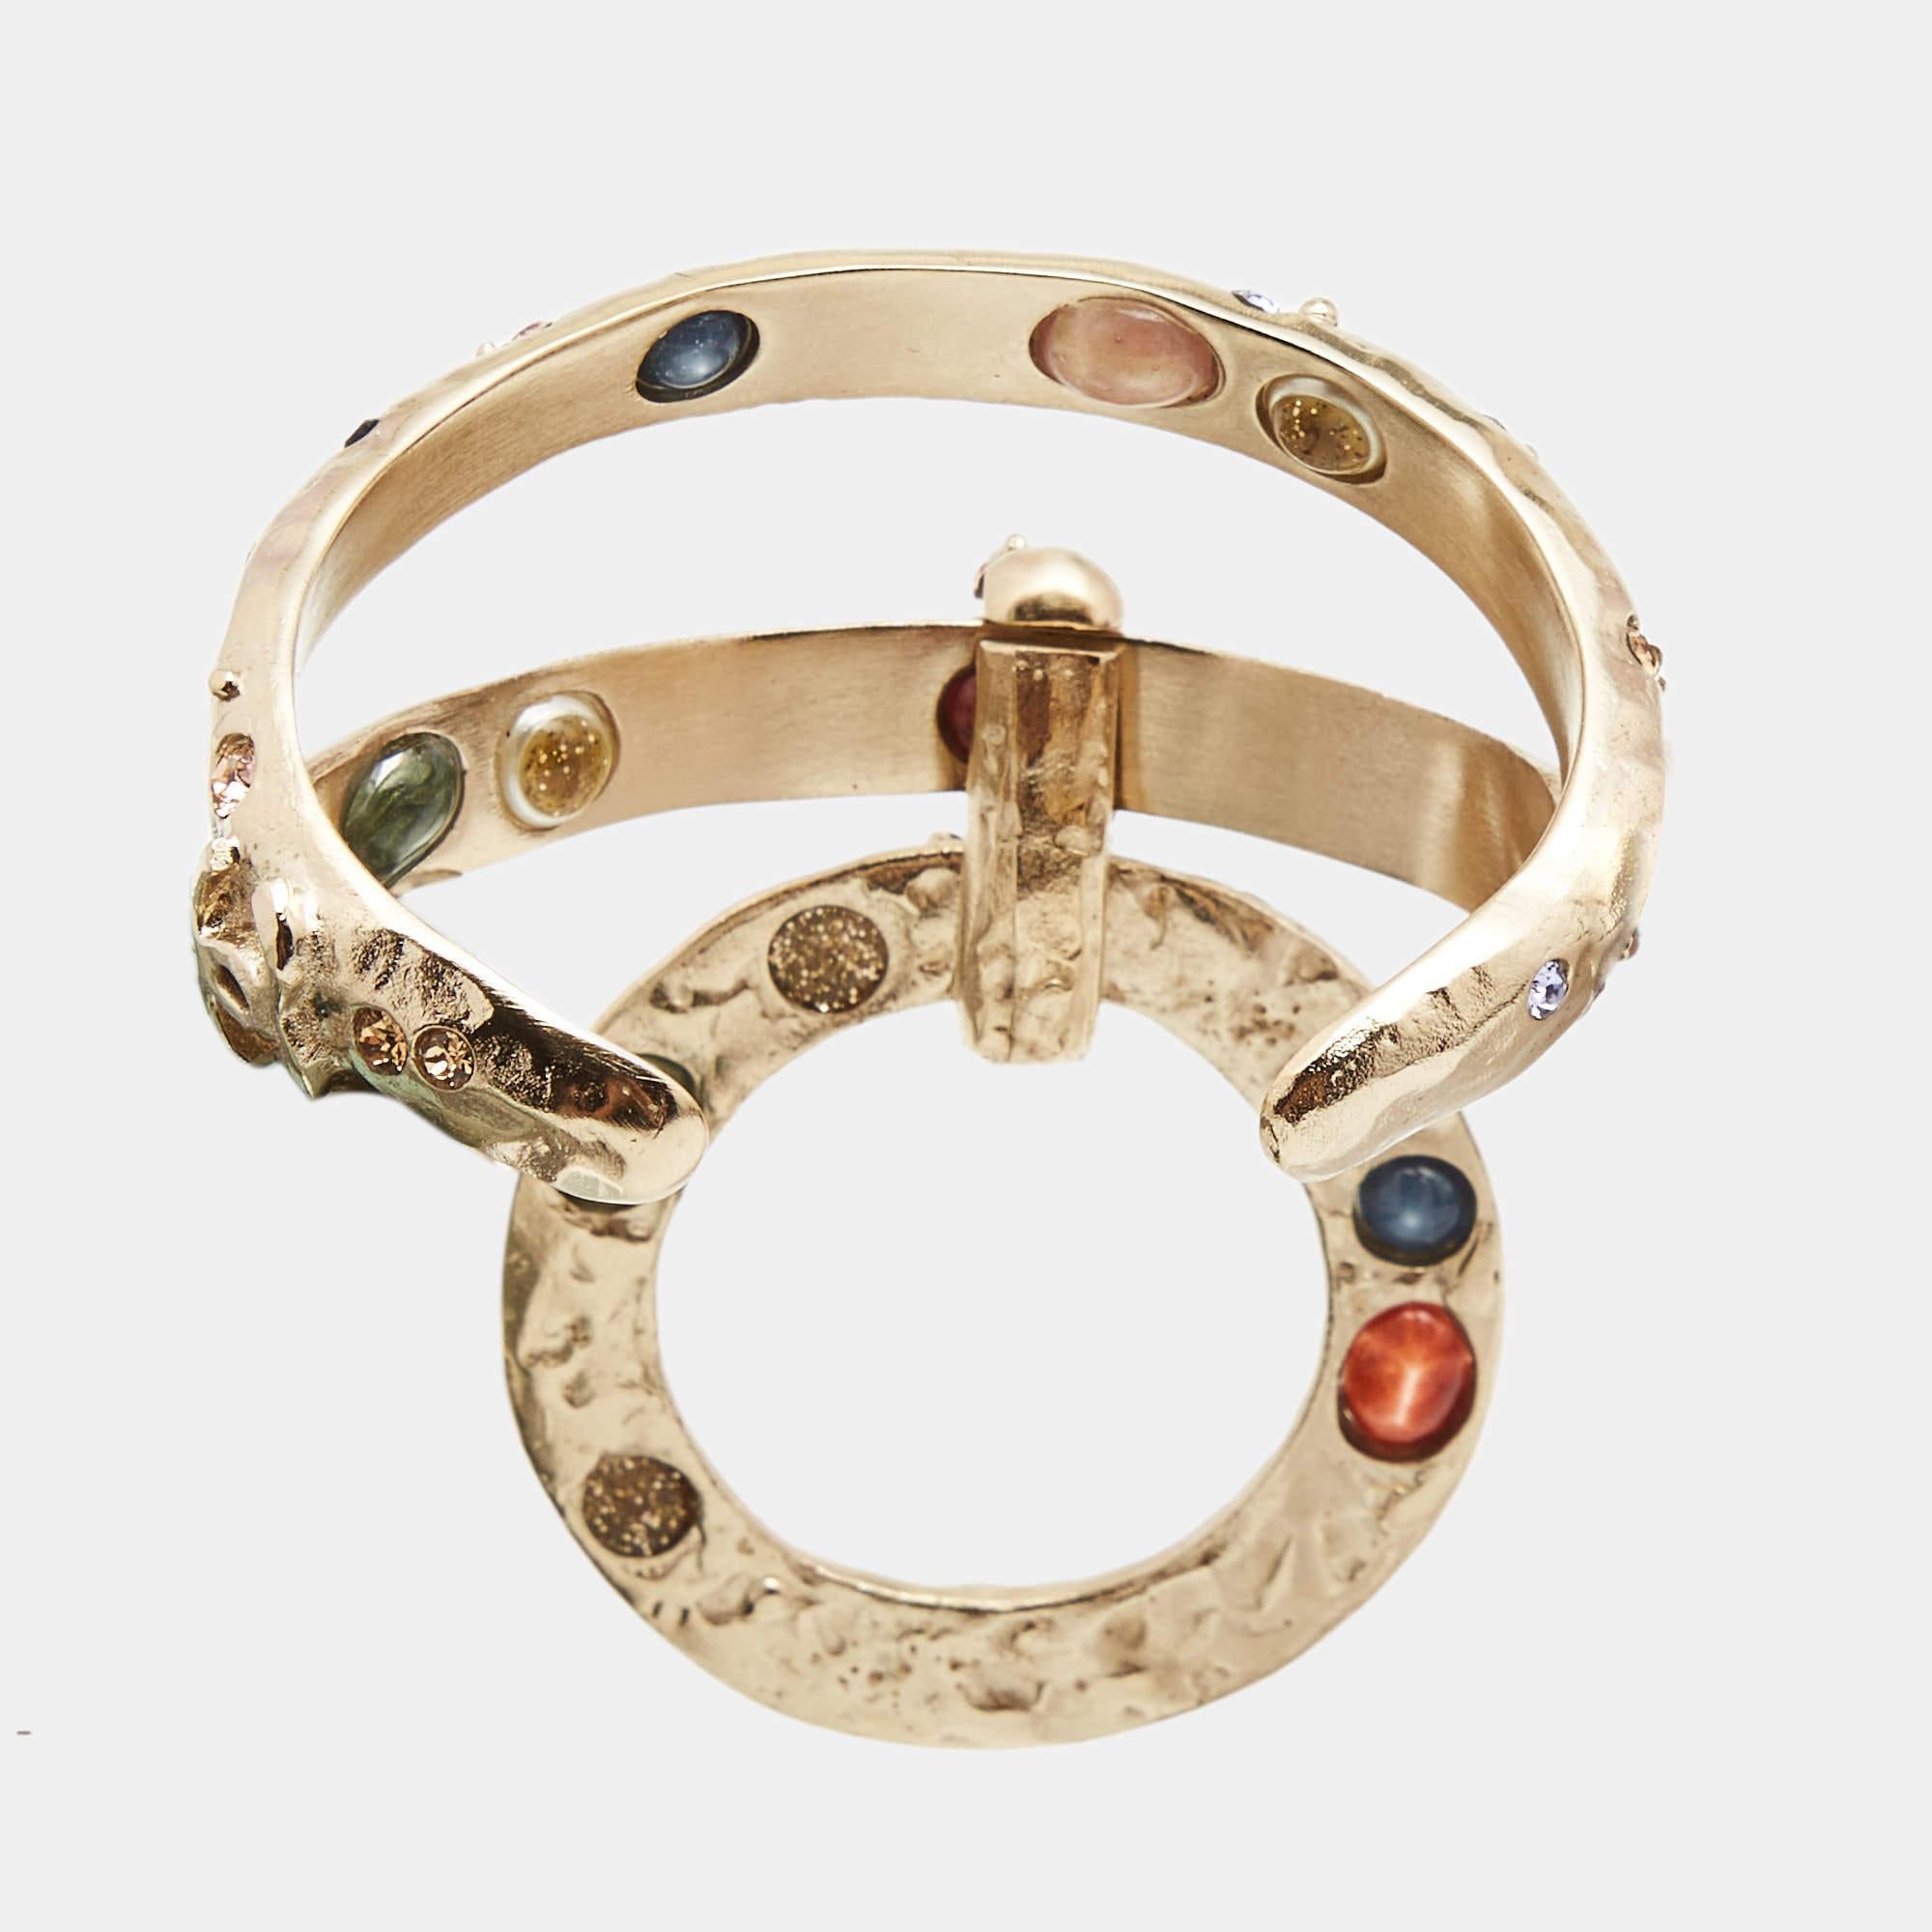 A chic statement piece from the luxury brand, Chanel, the multi-coloured Crystals Bracelet comes with gold tone hardware. The bracelet has the CC logo engraved on it and is decorated with appealing embellishments. This bracelet is beautiful to wear